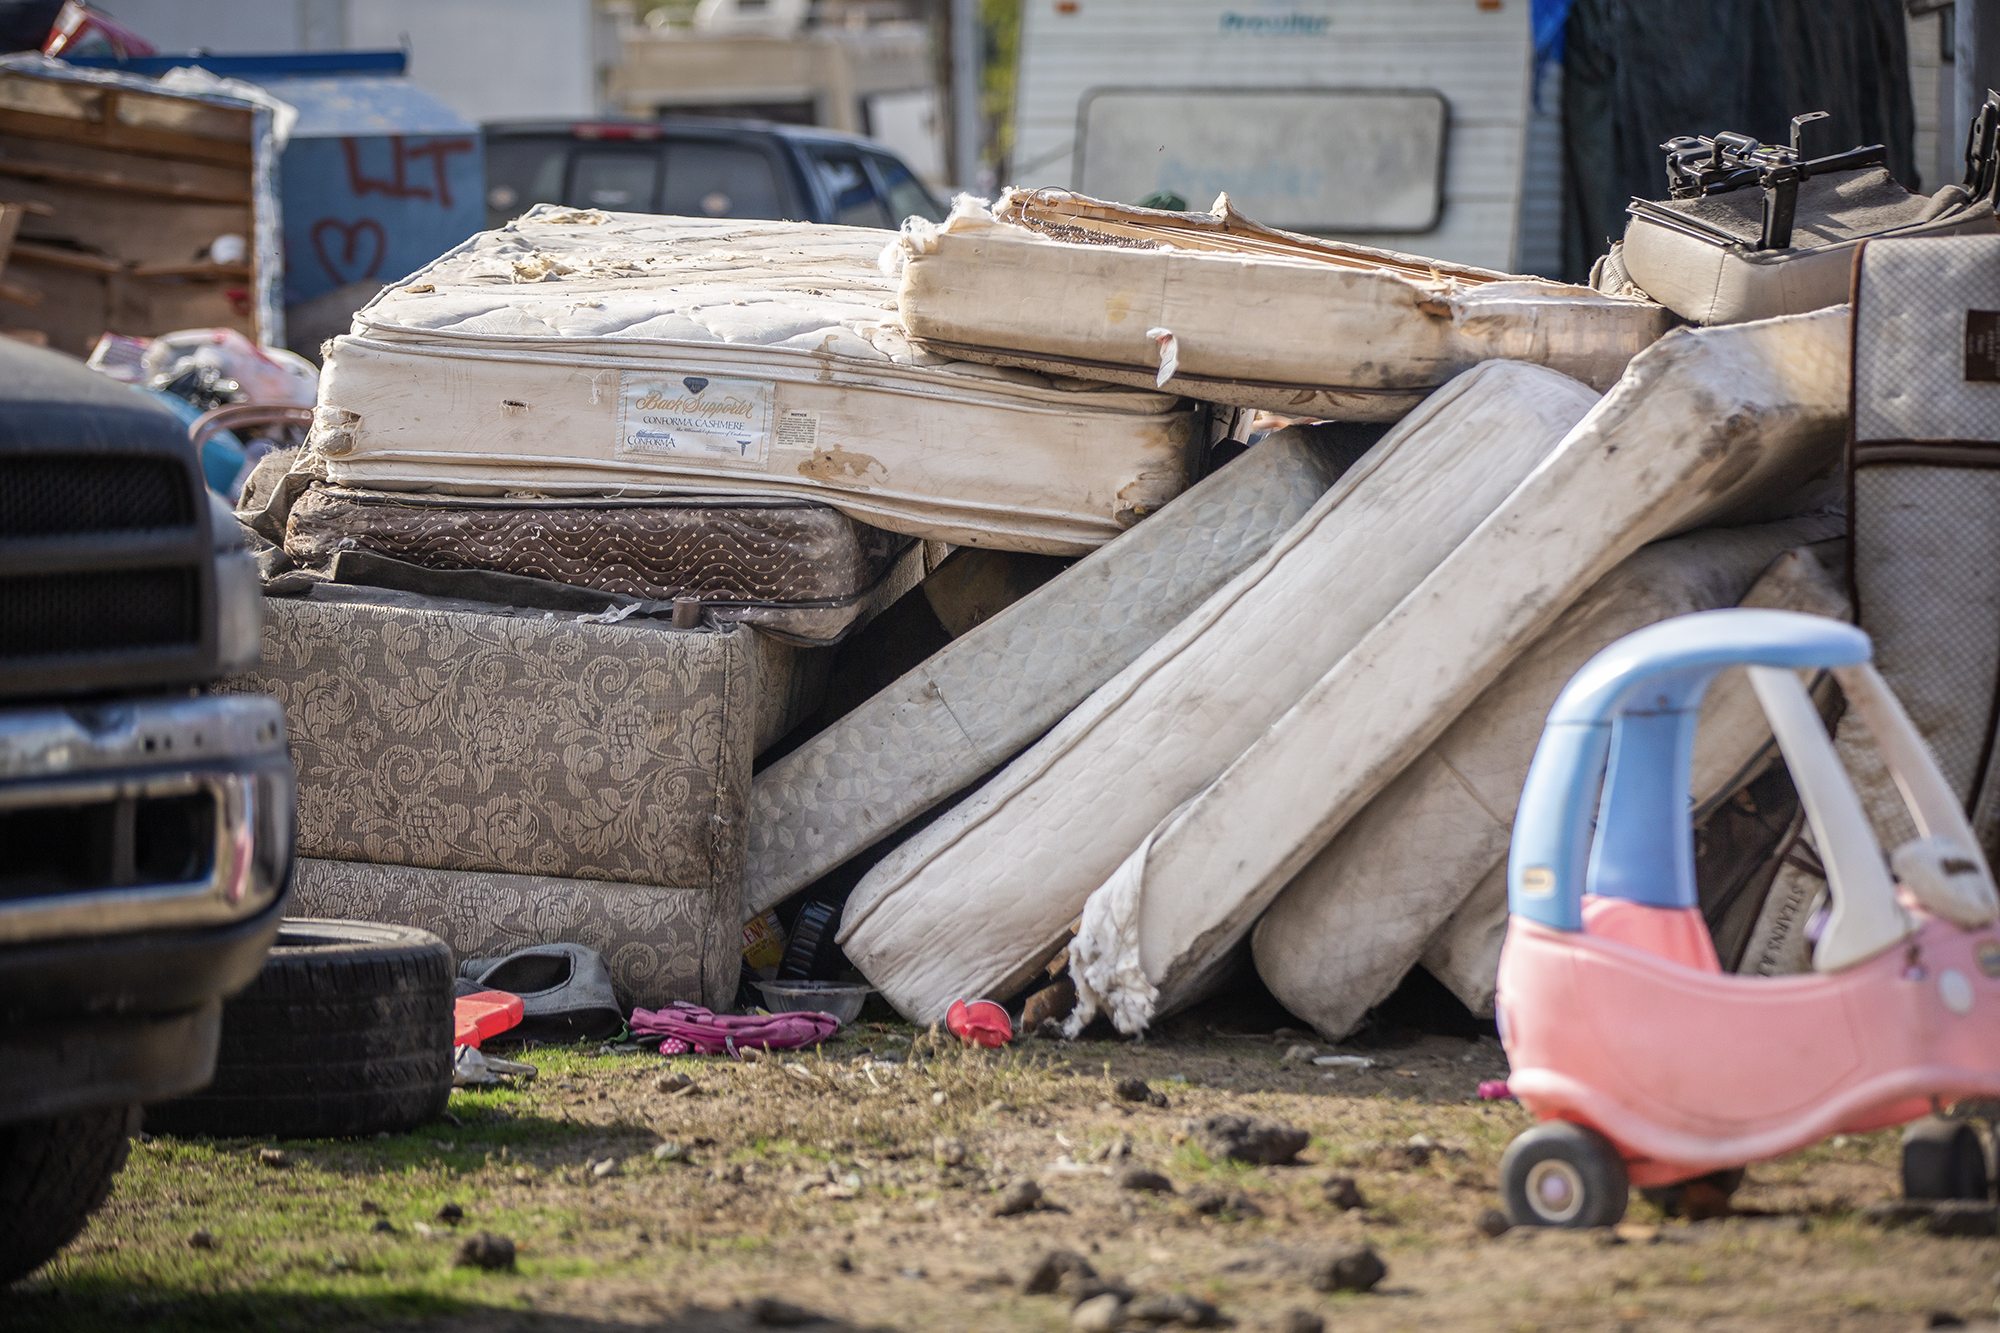 Mattresses lay on top of each other in a makeshift playground at Stockton Park Village in Stockton on Nov. 22, 2022. Bobby Riley, 87, lives in the area where he states that the owner let the park go and garbage hasn't been picked up for months.